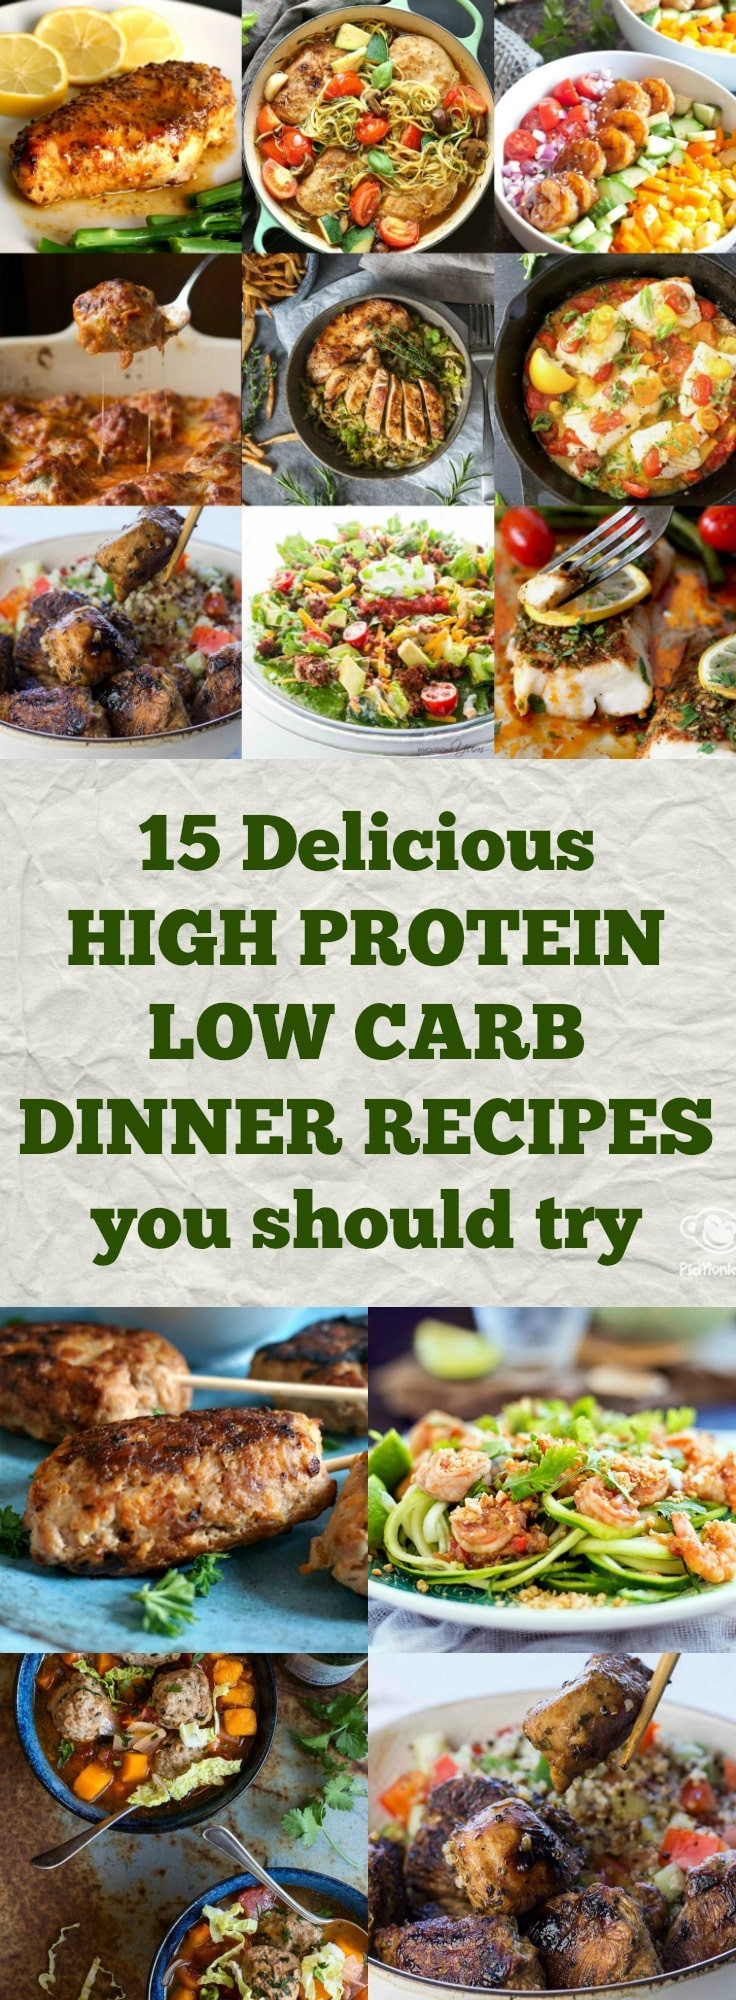 High Protein Dinner Recipes
 15 Delicious High Protein Low Carb Dinner Recipes You